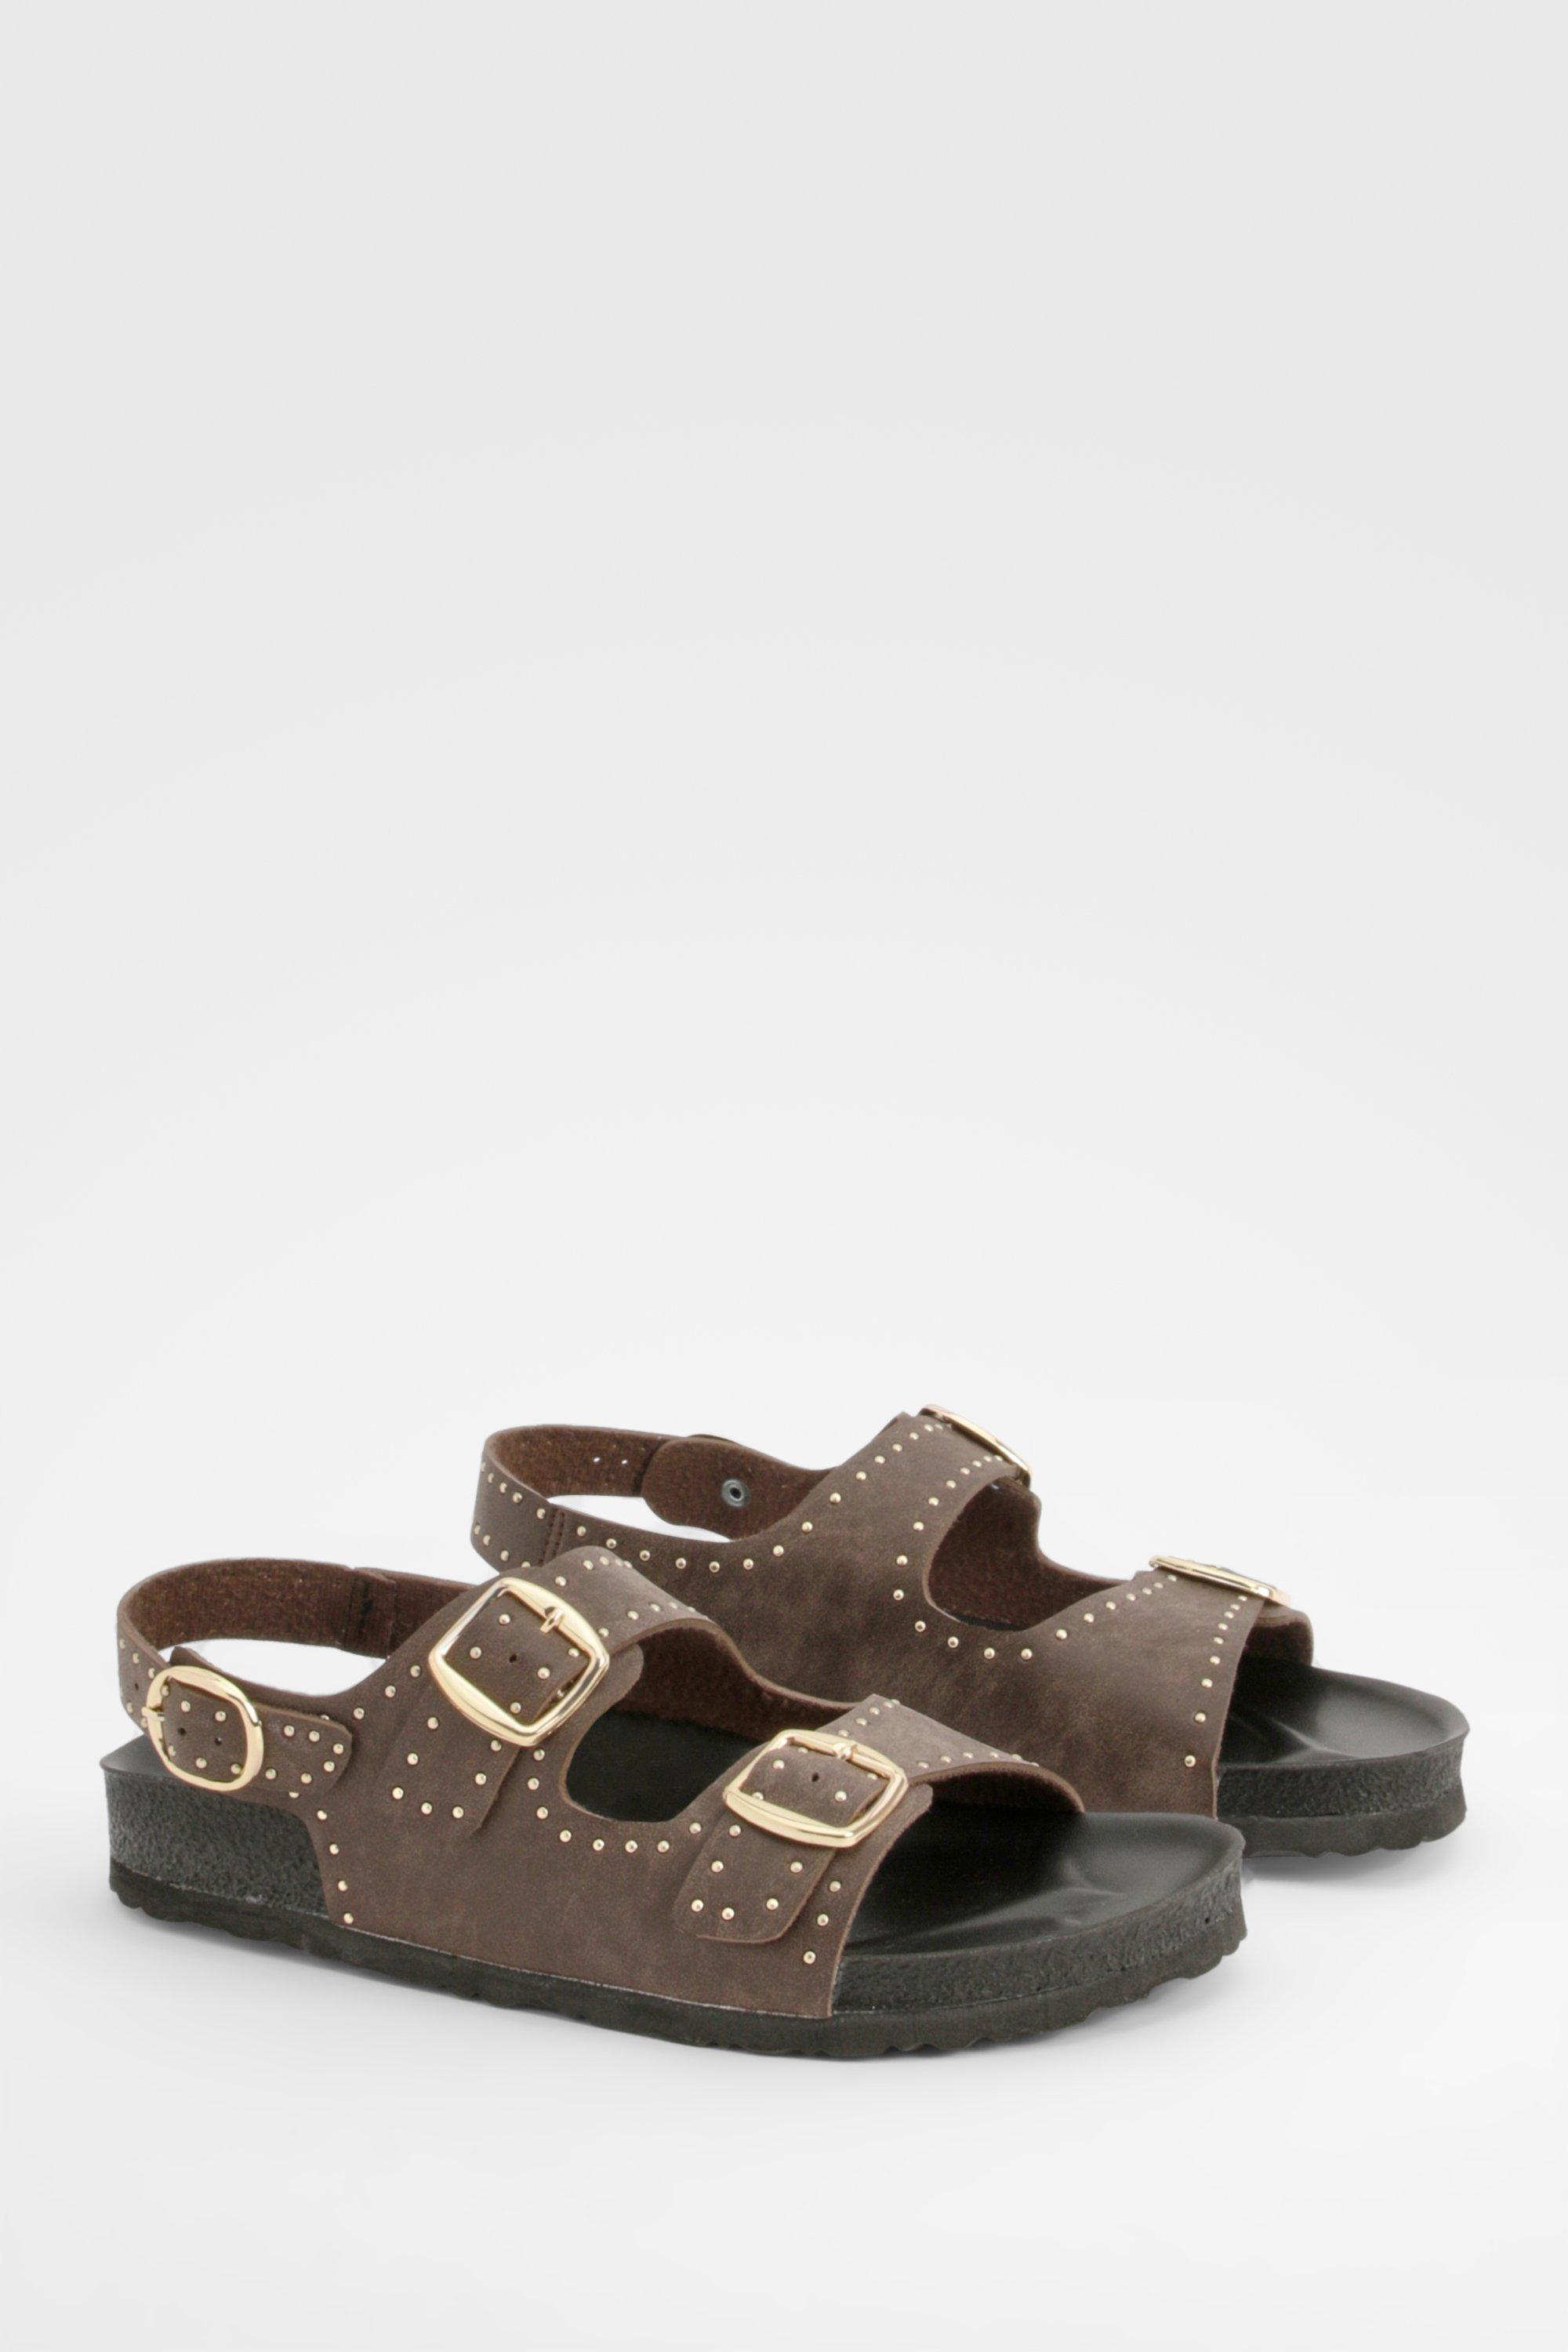 Image of Burnished Pu Studded Double Strap Dad Sandals, Brown